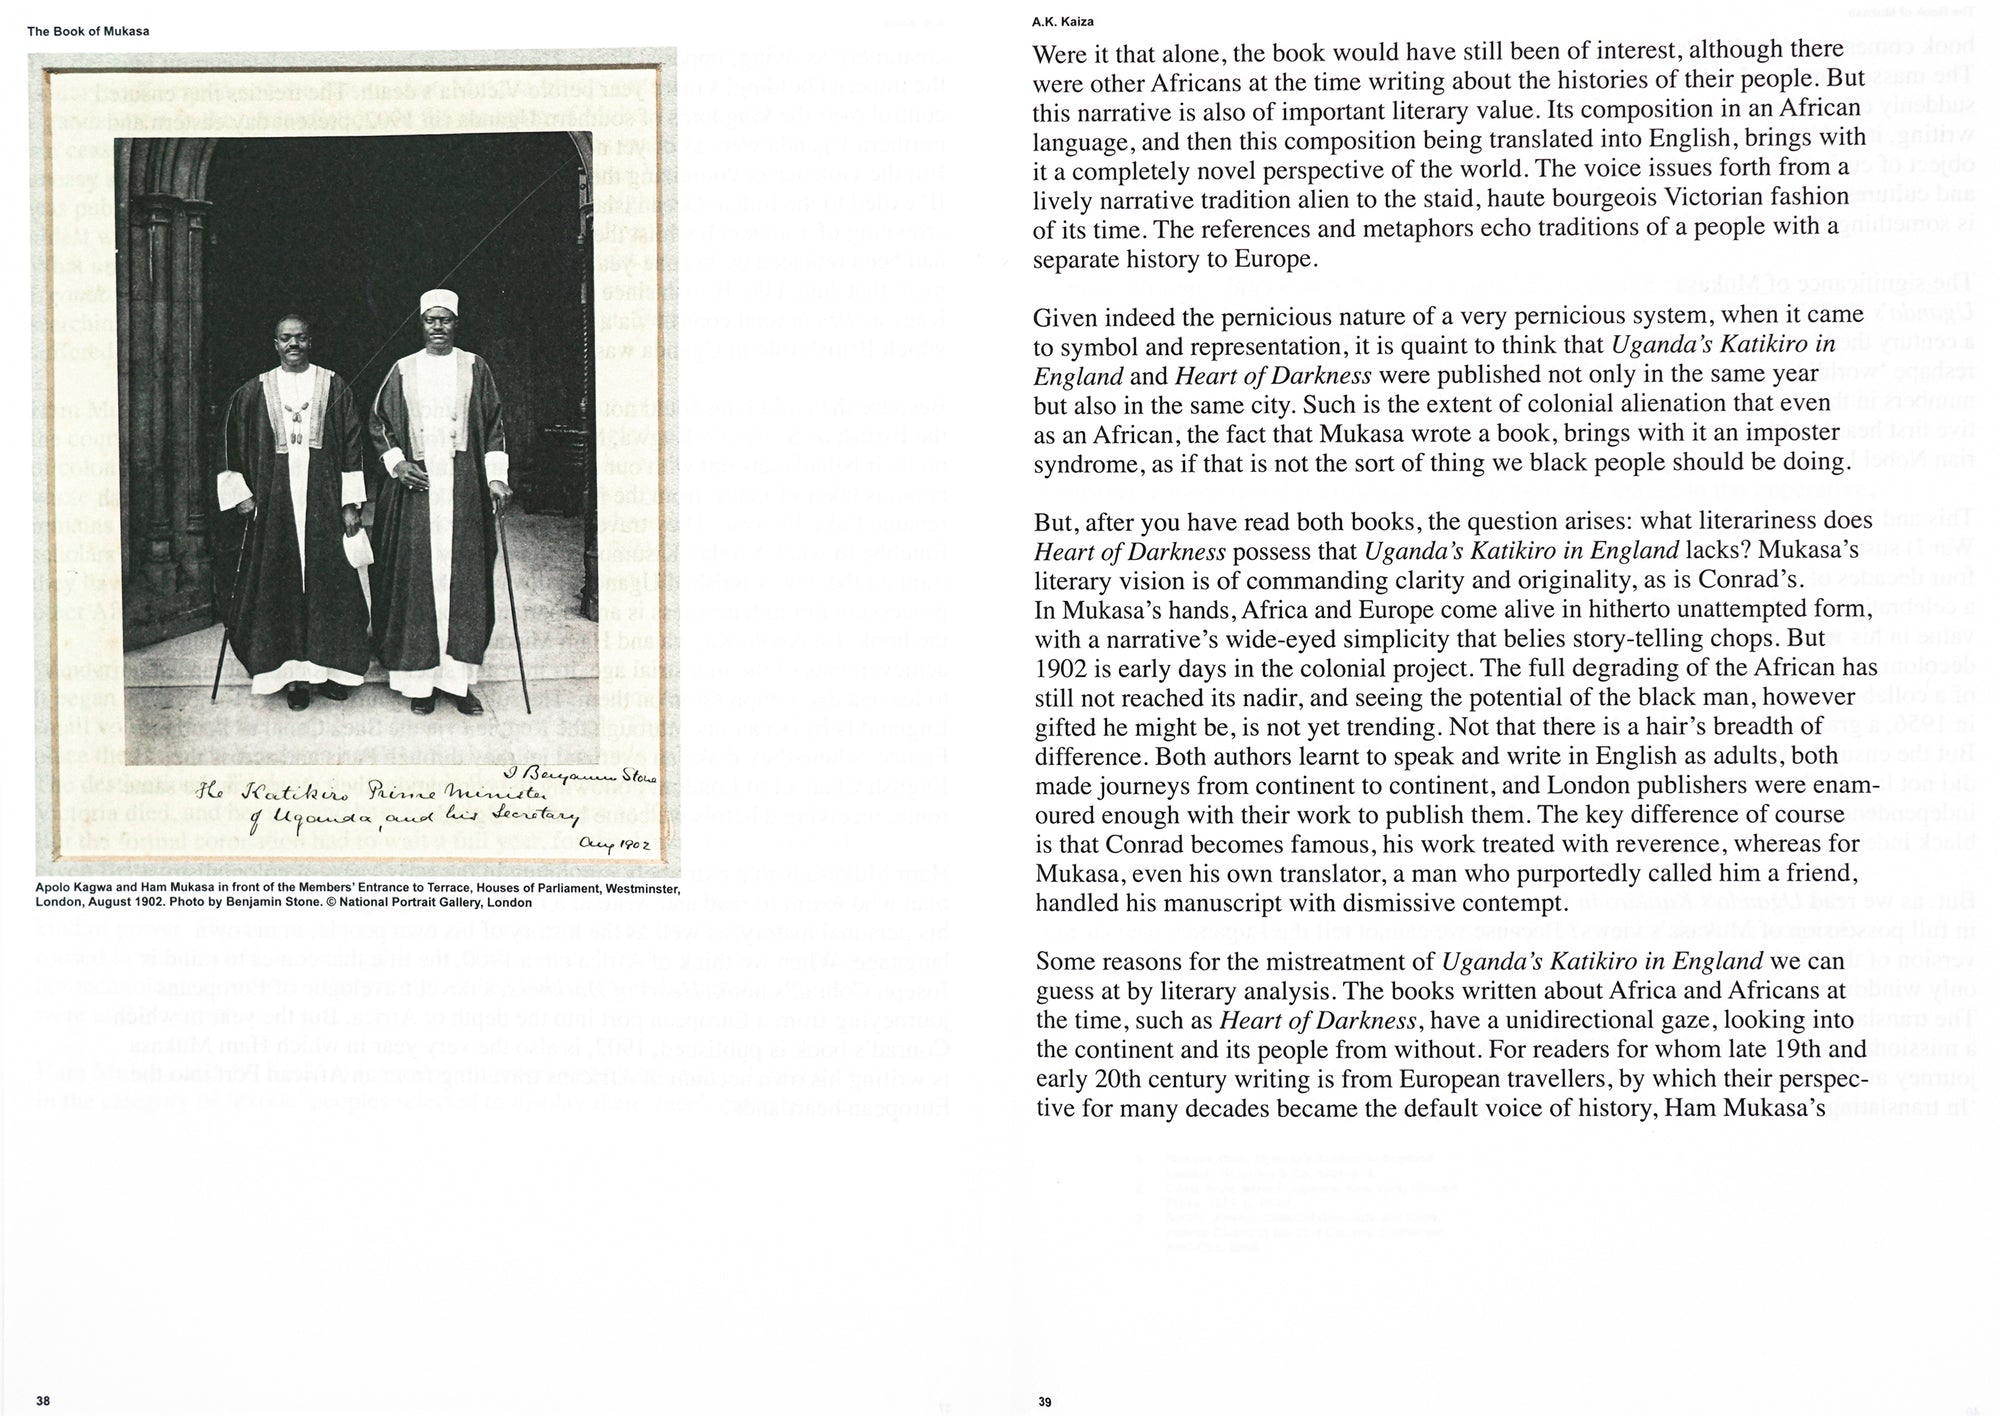 A spread of Errant Journal, on the left side a black and white photograph of Apolo Kagwa and Ham Mukasa in front of the houses of Parliament in Westminster, London, courtesy of the National Portrait Gallery. On the right hand side lies flow text in serif type.